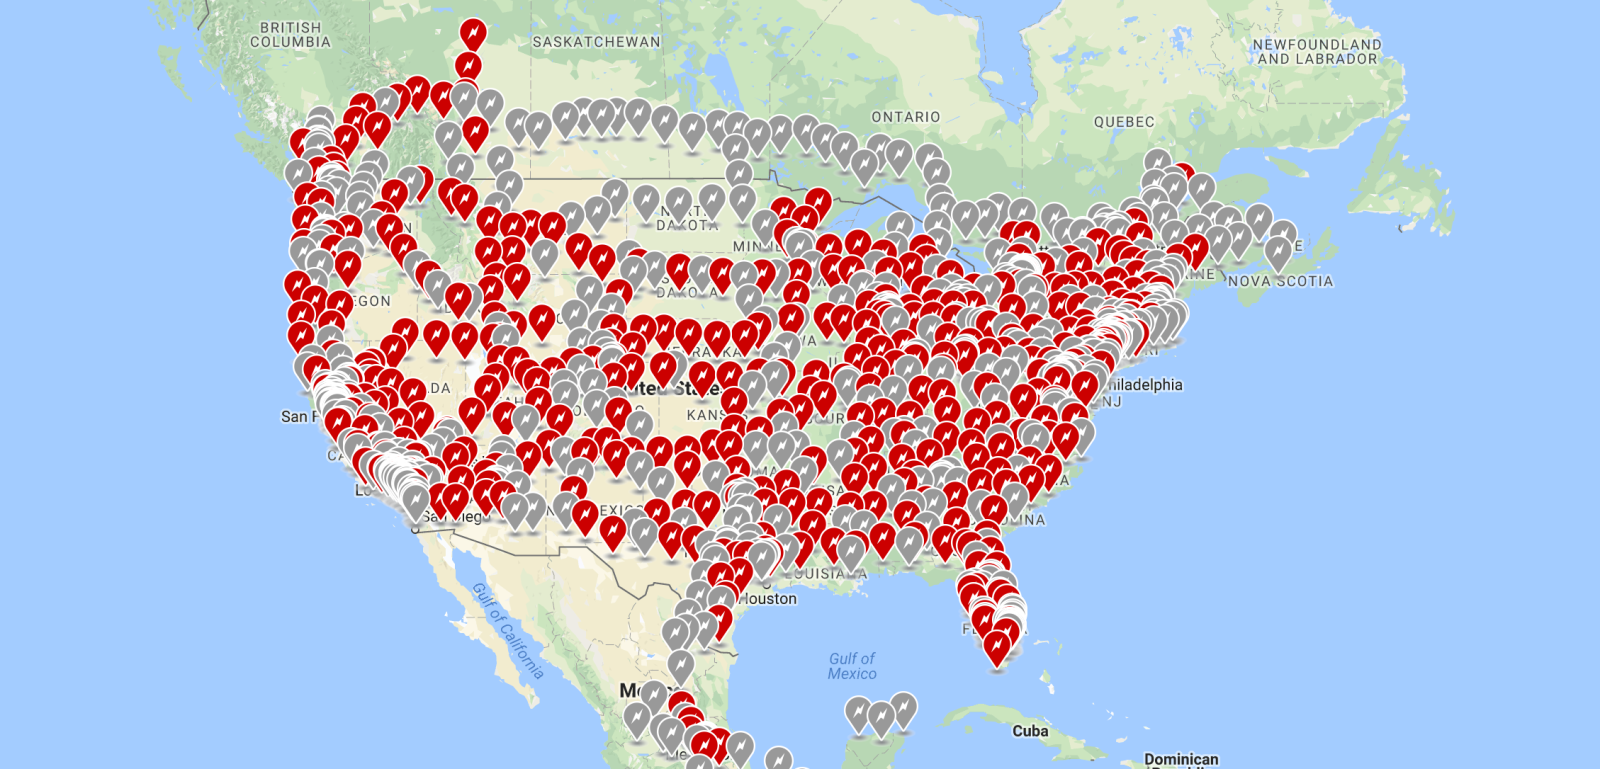 Tesla updates Supercharger network with new stations enabling